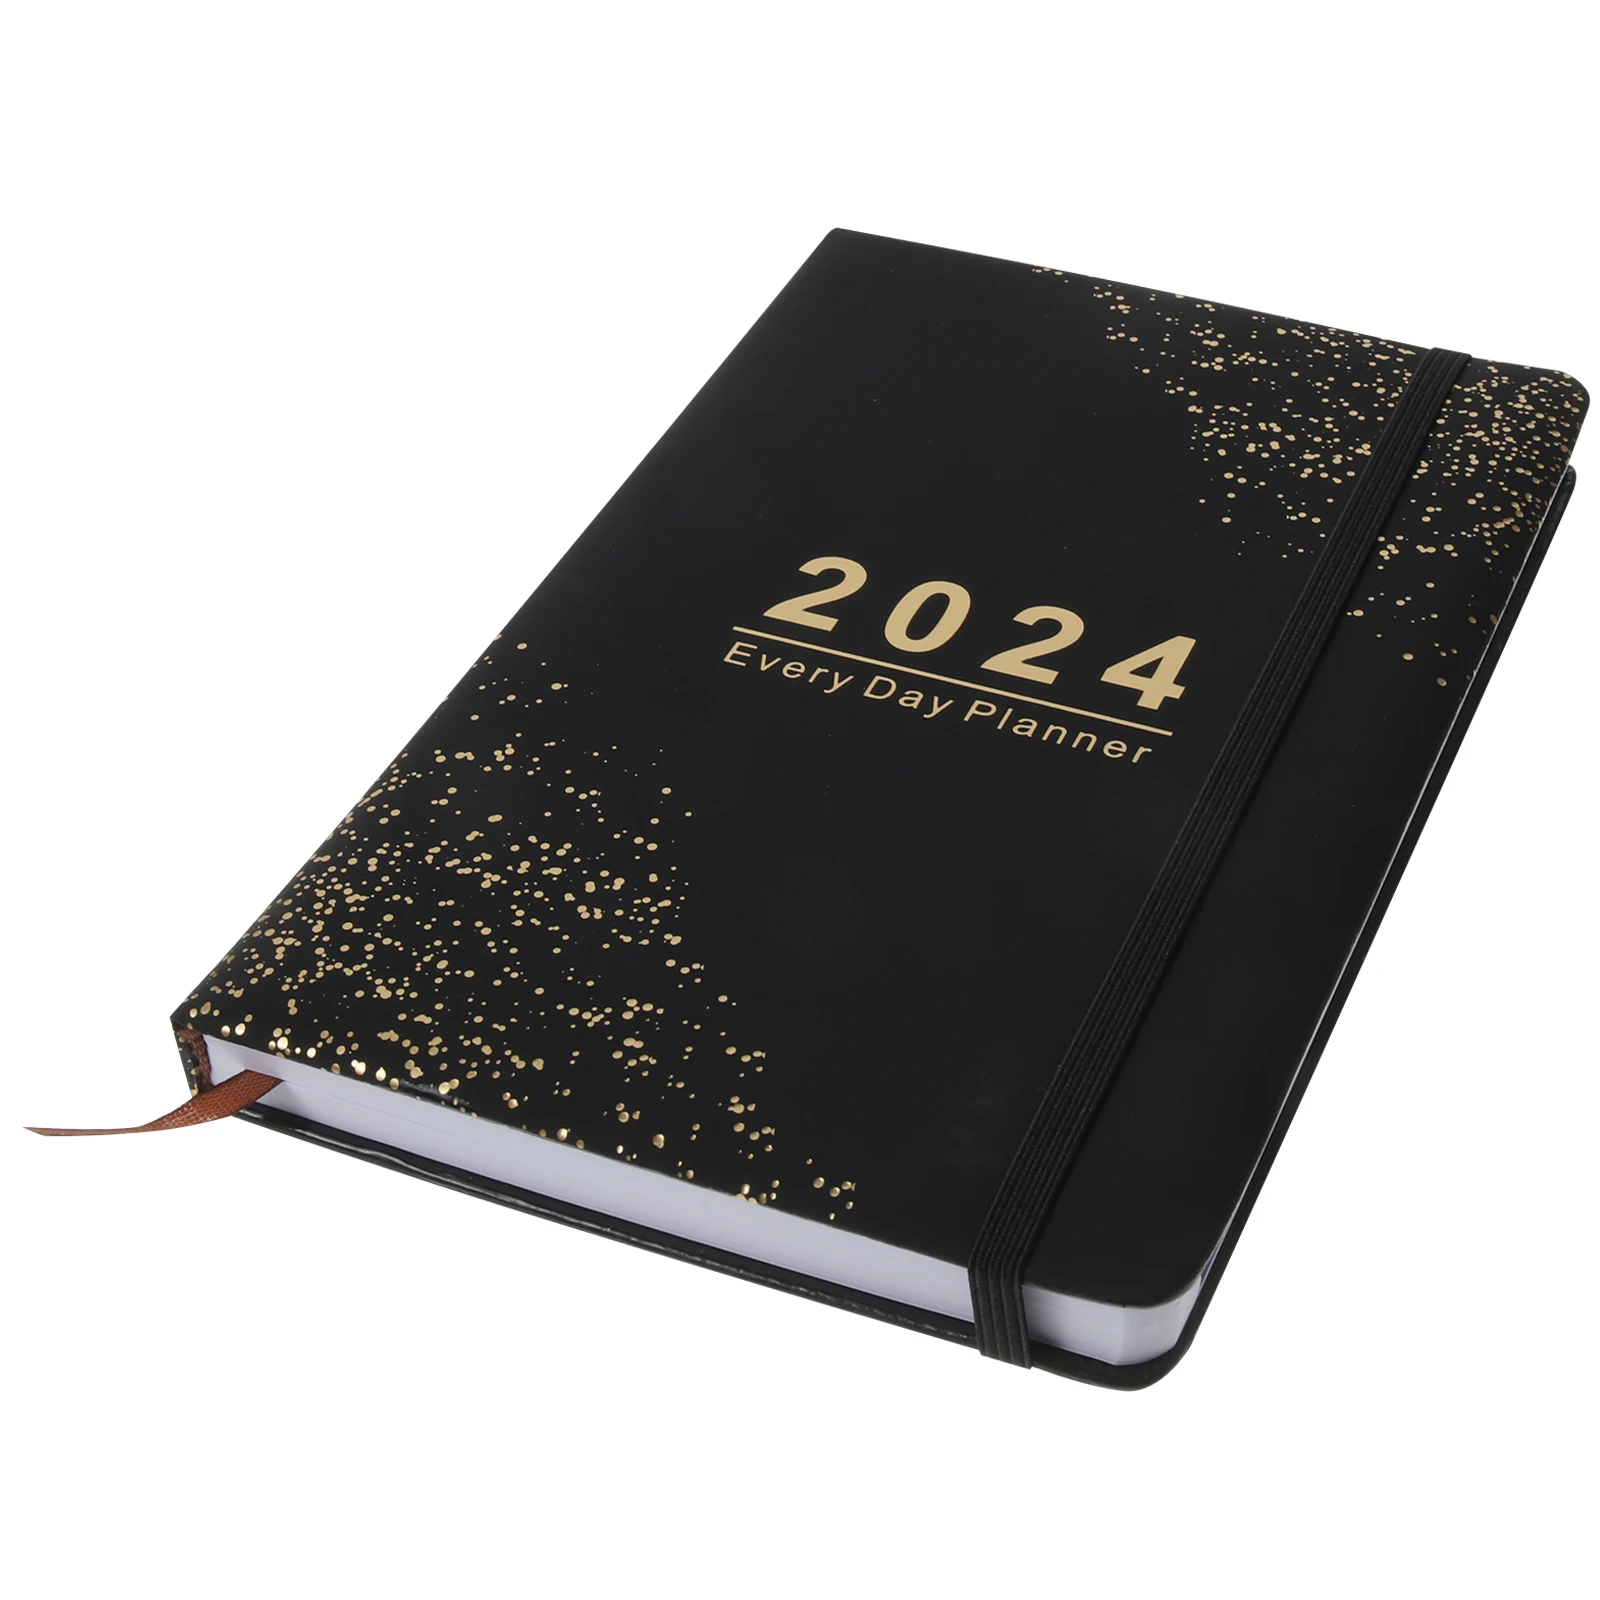 2024 Schedule Daily Schedule English Notebook Schedule Leather Cover Daily Schedule Schedule This Log Table Monthly Planner 2021 year 400 pages a5 agendas journals notebook organizer diary schedule planner calendar leather soft cover efficiency journal